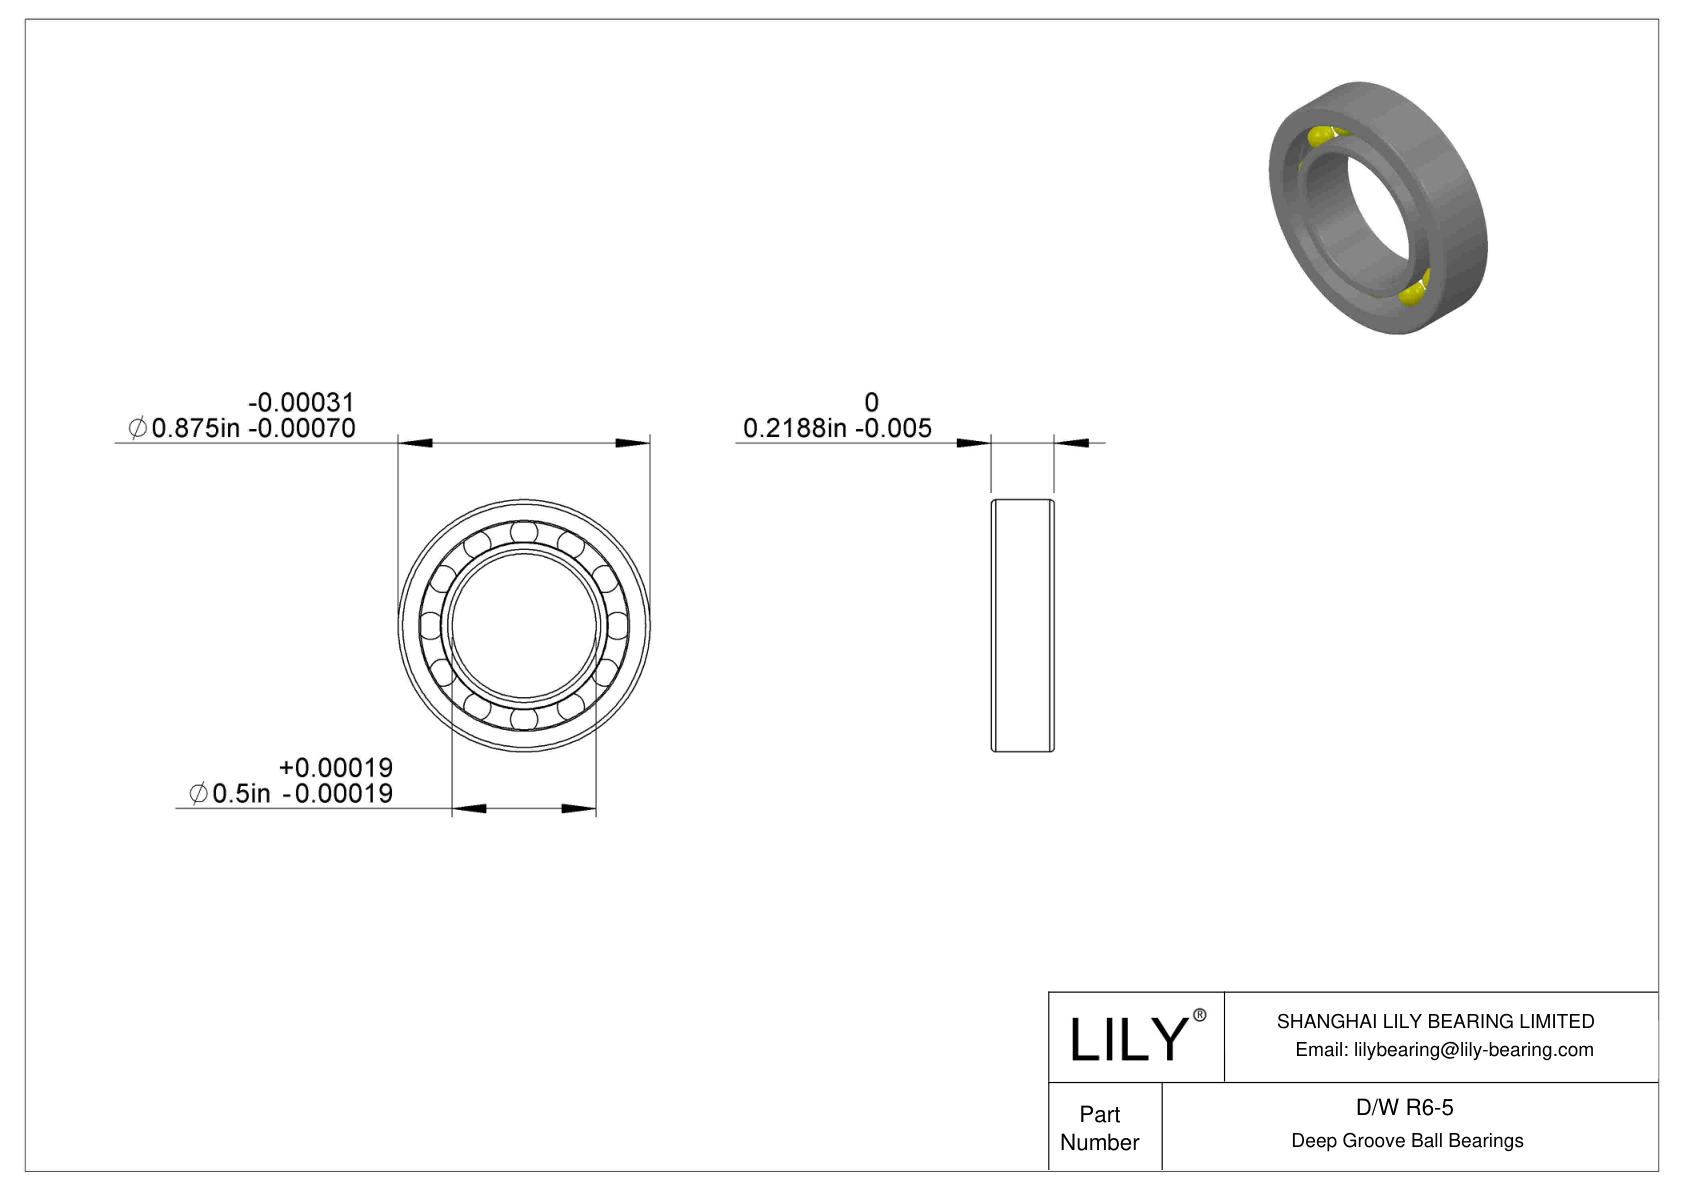 D/W R6-5 Stainless Steel Deep Groove Ball Bearings cad drawing